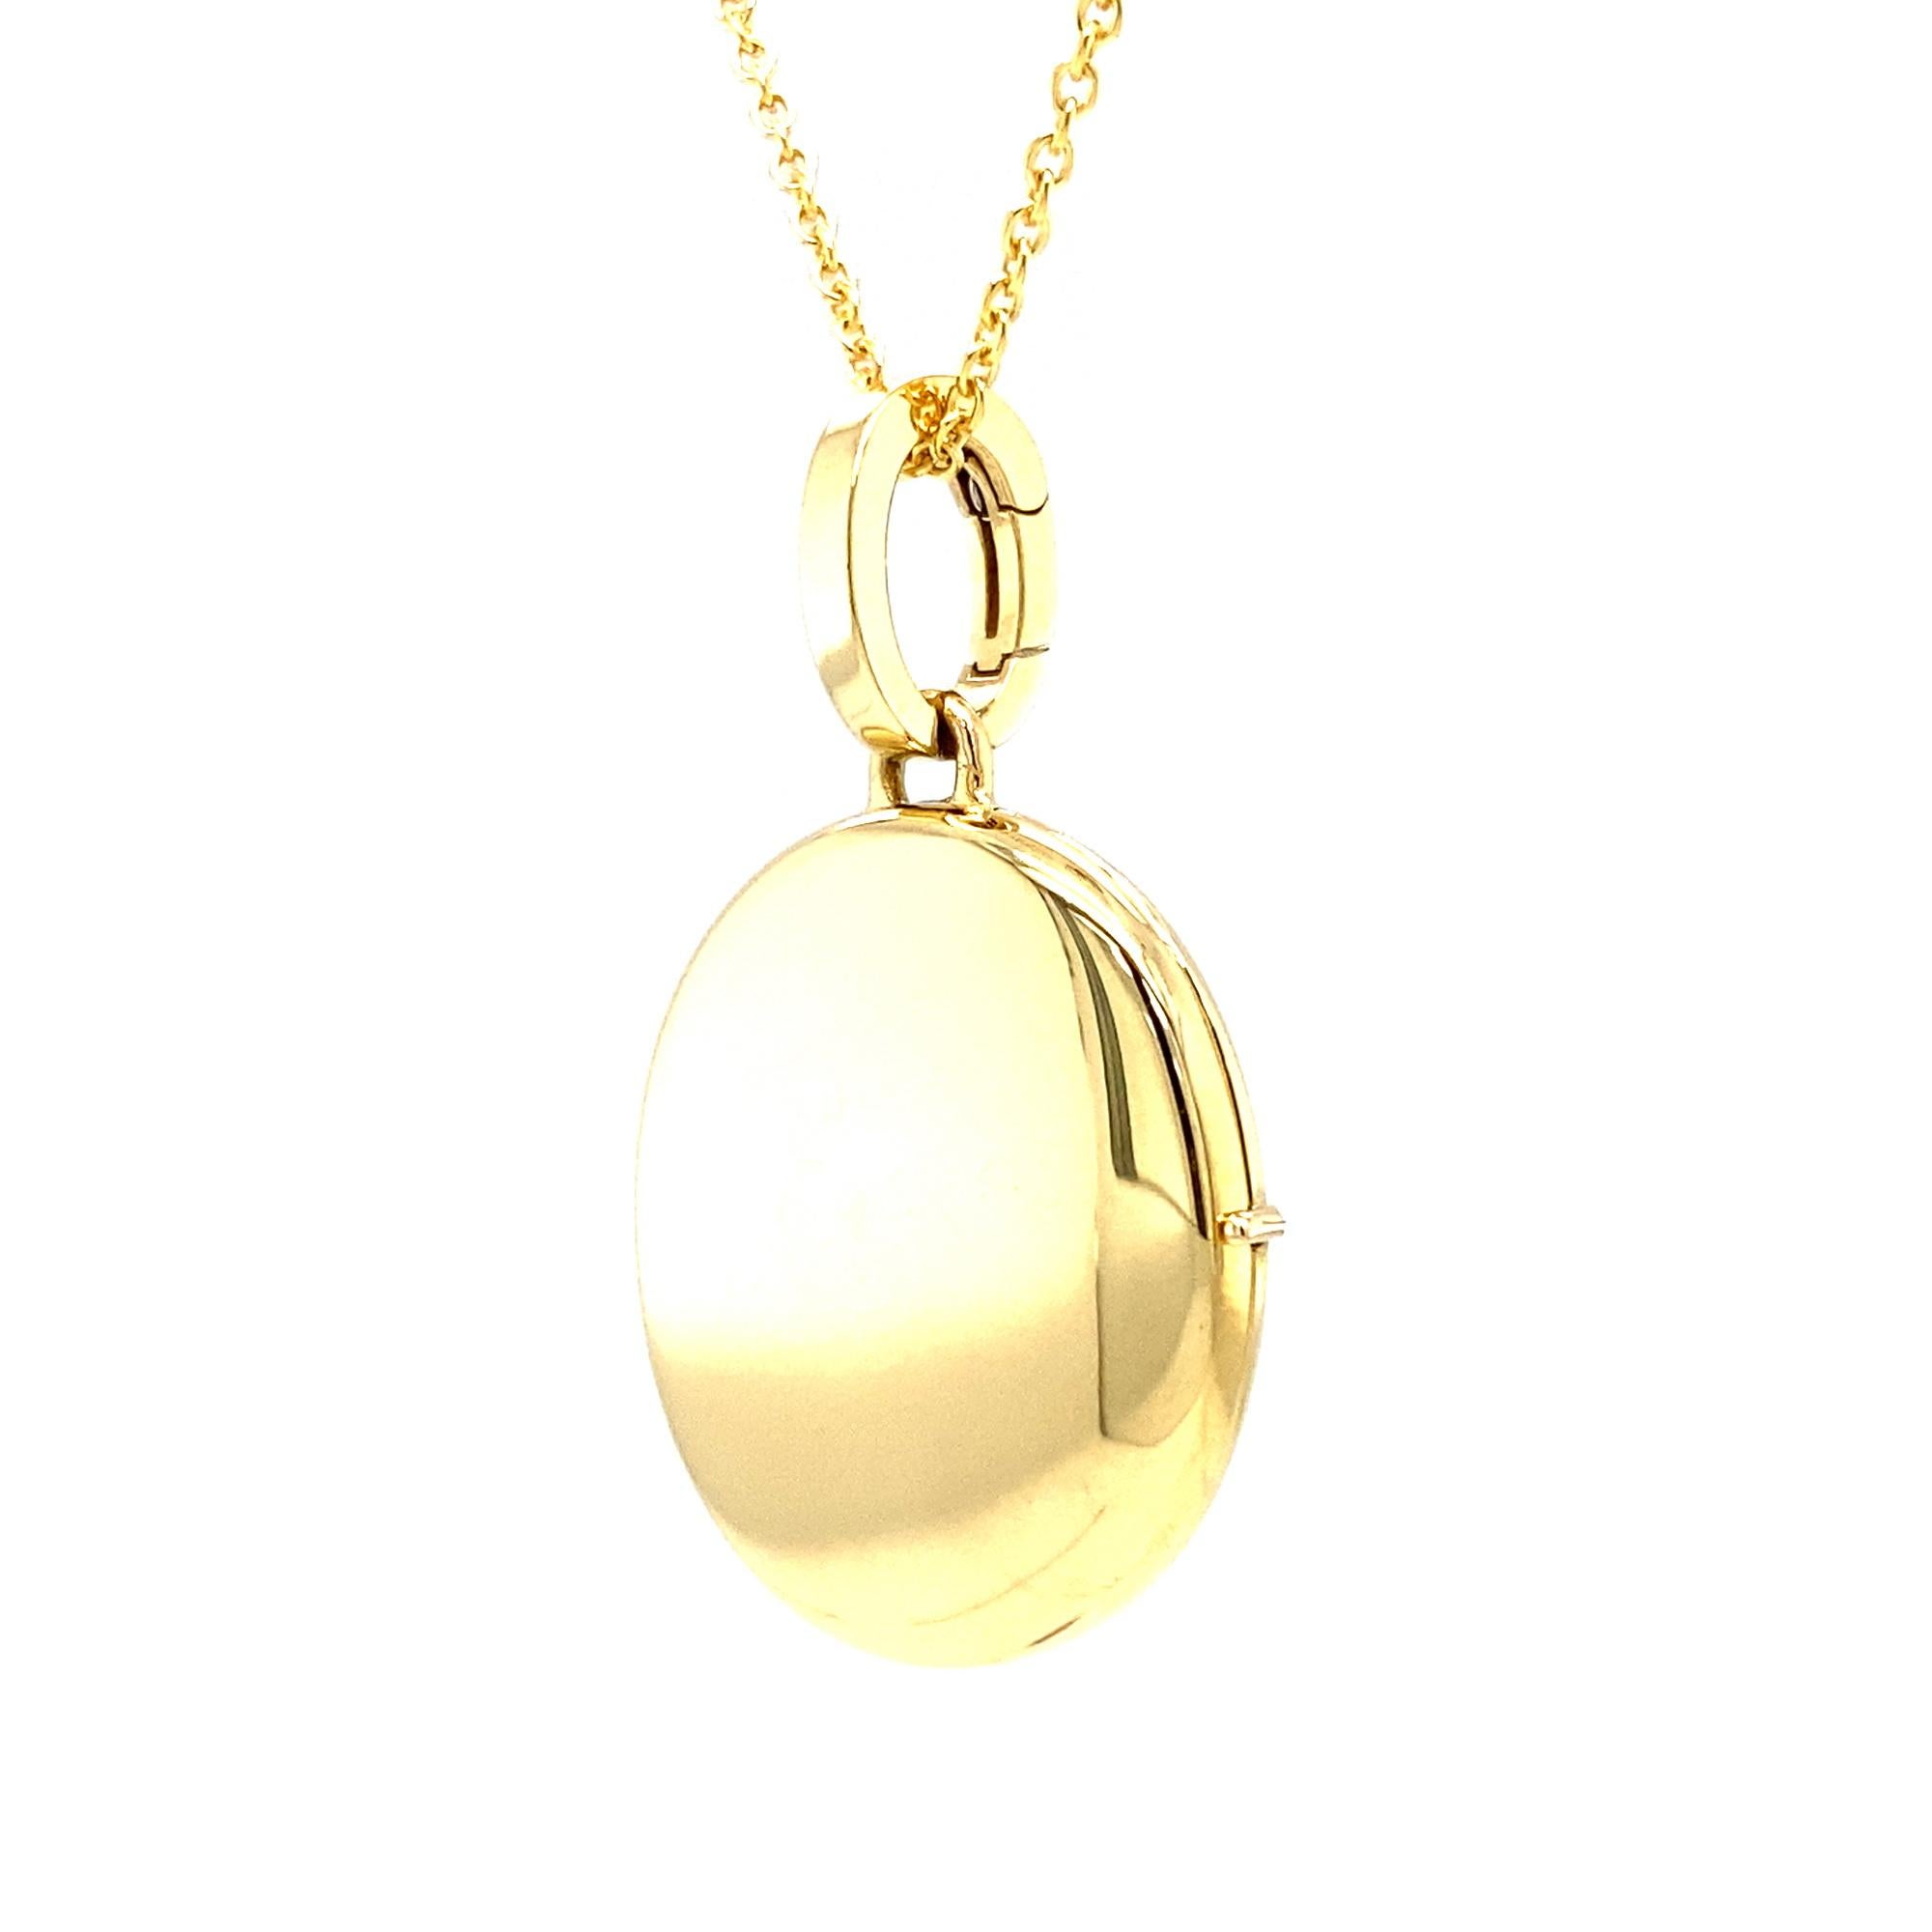 Victor Mayer customizable oval polished pendant locket 18k yellow gold, Hallmark collection, measurements app. 23 mm x 20 mm

About the creator Victor Mayer
Victor Mayer is internationally renowned for elegant timeless designs and unrivalled